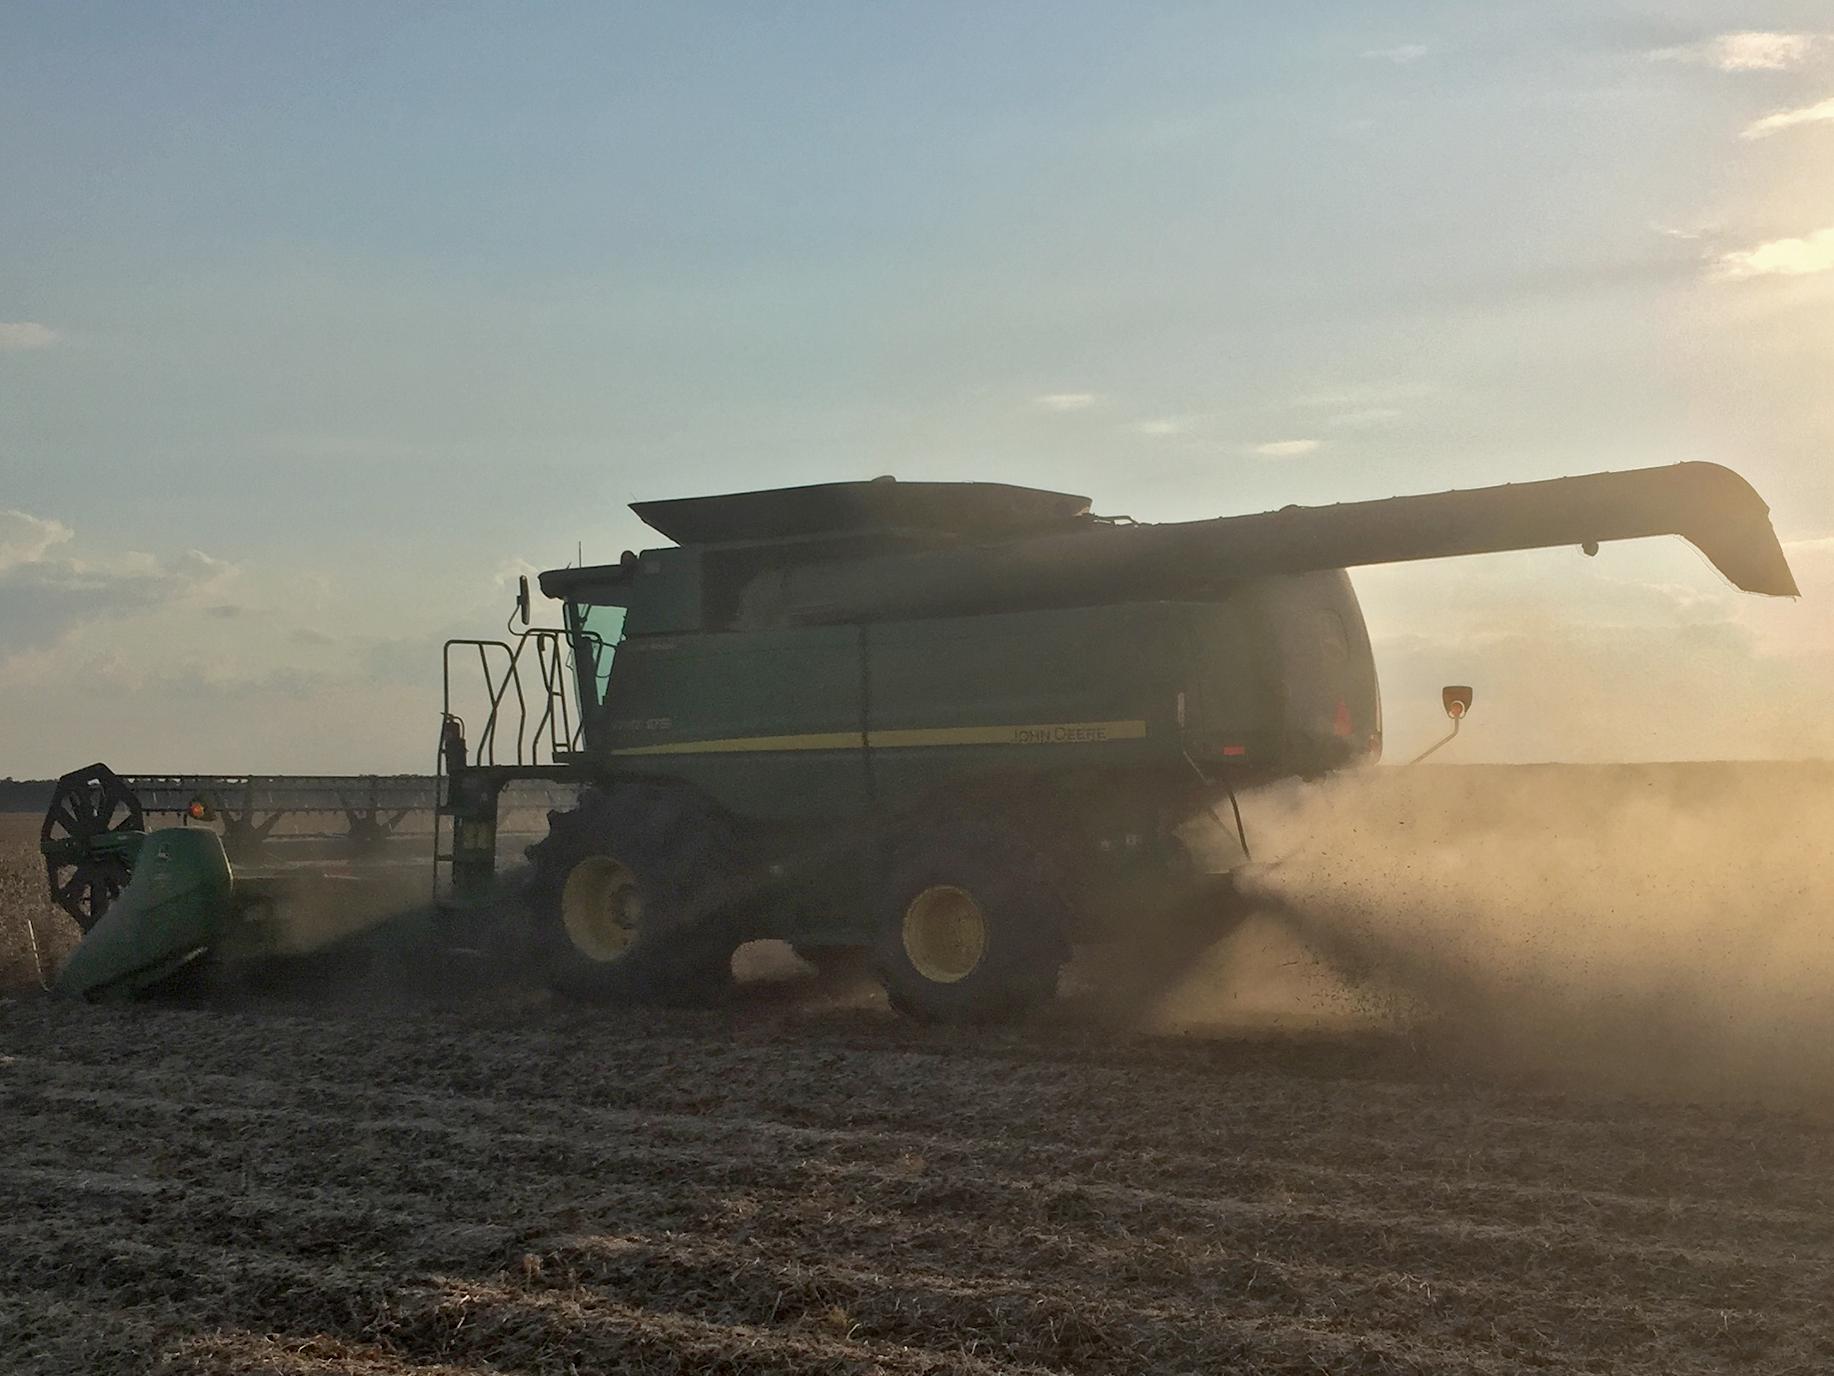 Harvest was nearly done by the end of October for the state’s 2 million acre soybean crop. Experts expect yields to average 48 bushels per acre across the state, keeping this year’s production in line with that of recent years. This combine was harvesting Leflore County soybeans Sept. 23, 2016. (Photo by MSU Extension Service/Trent Irby)​